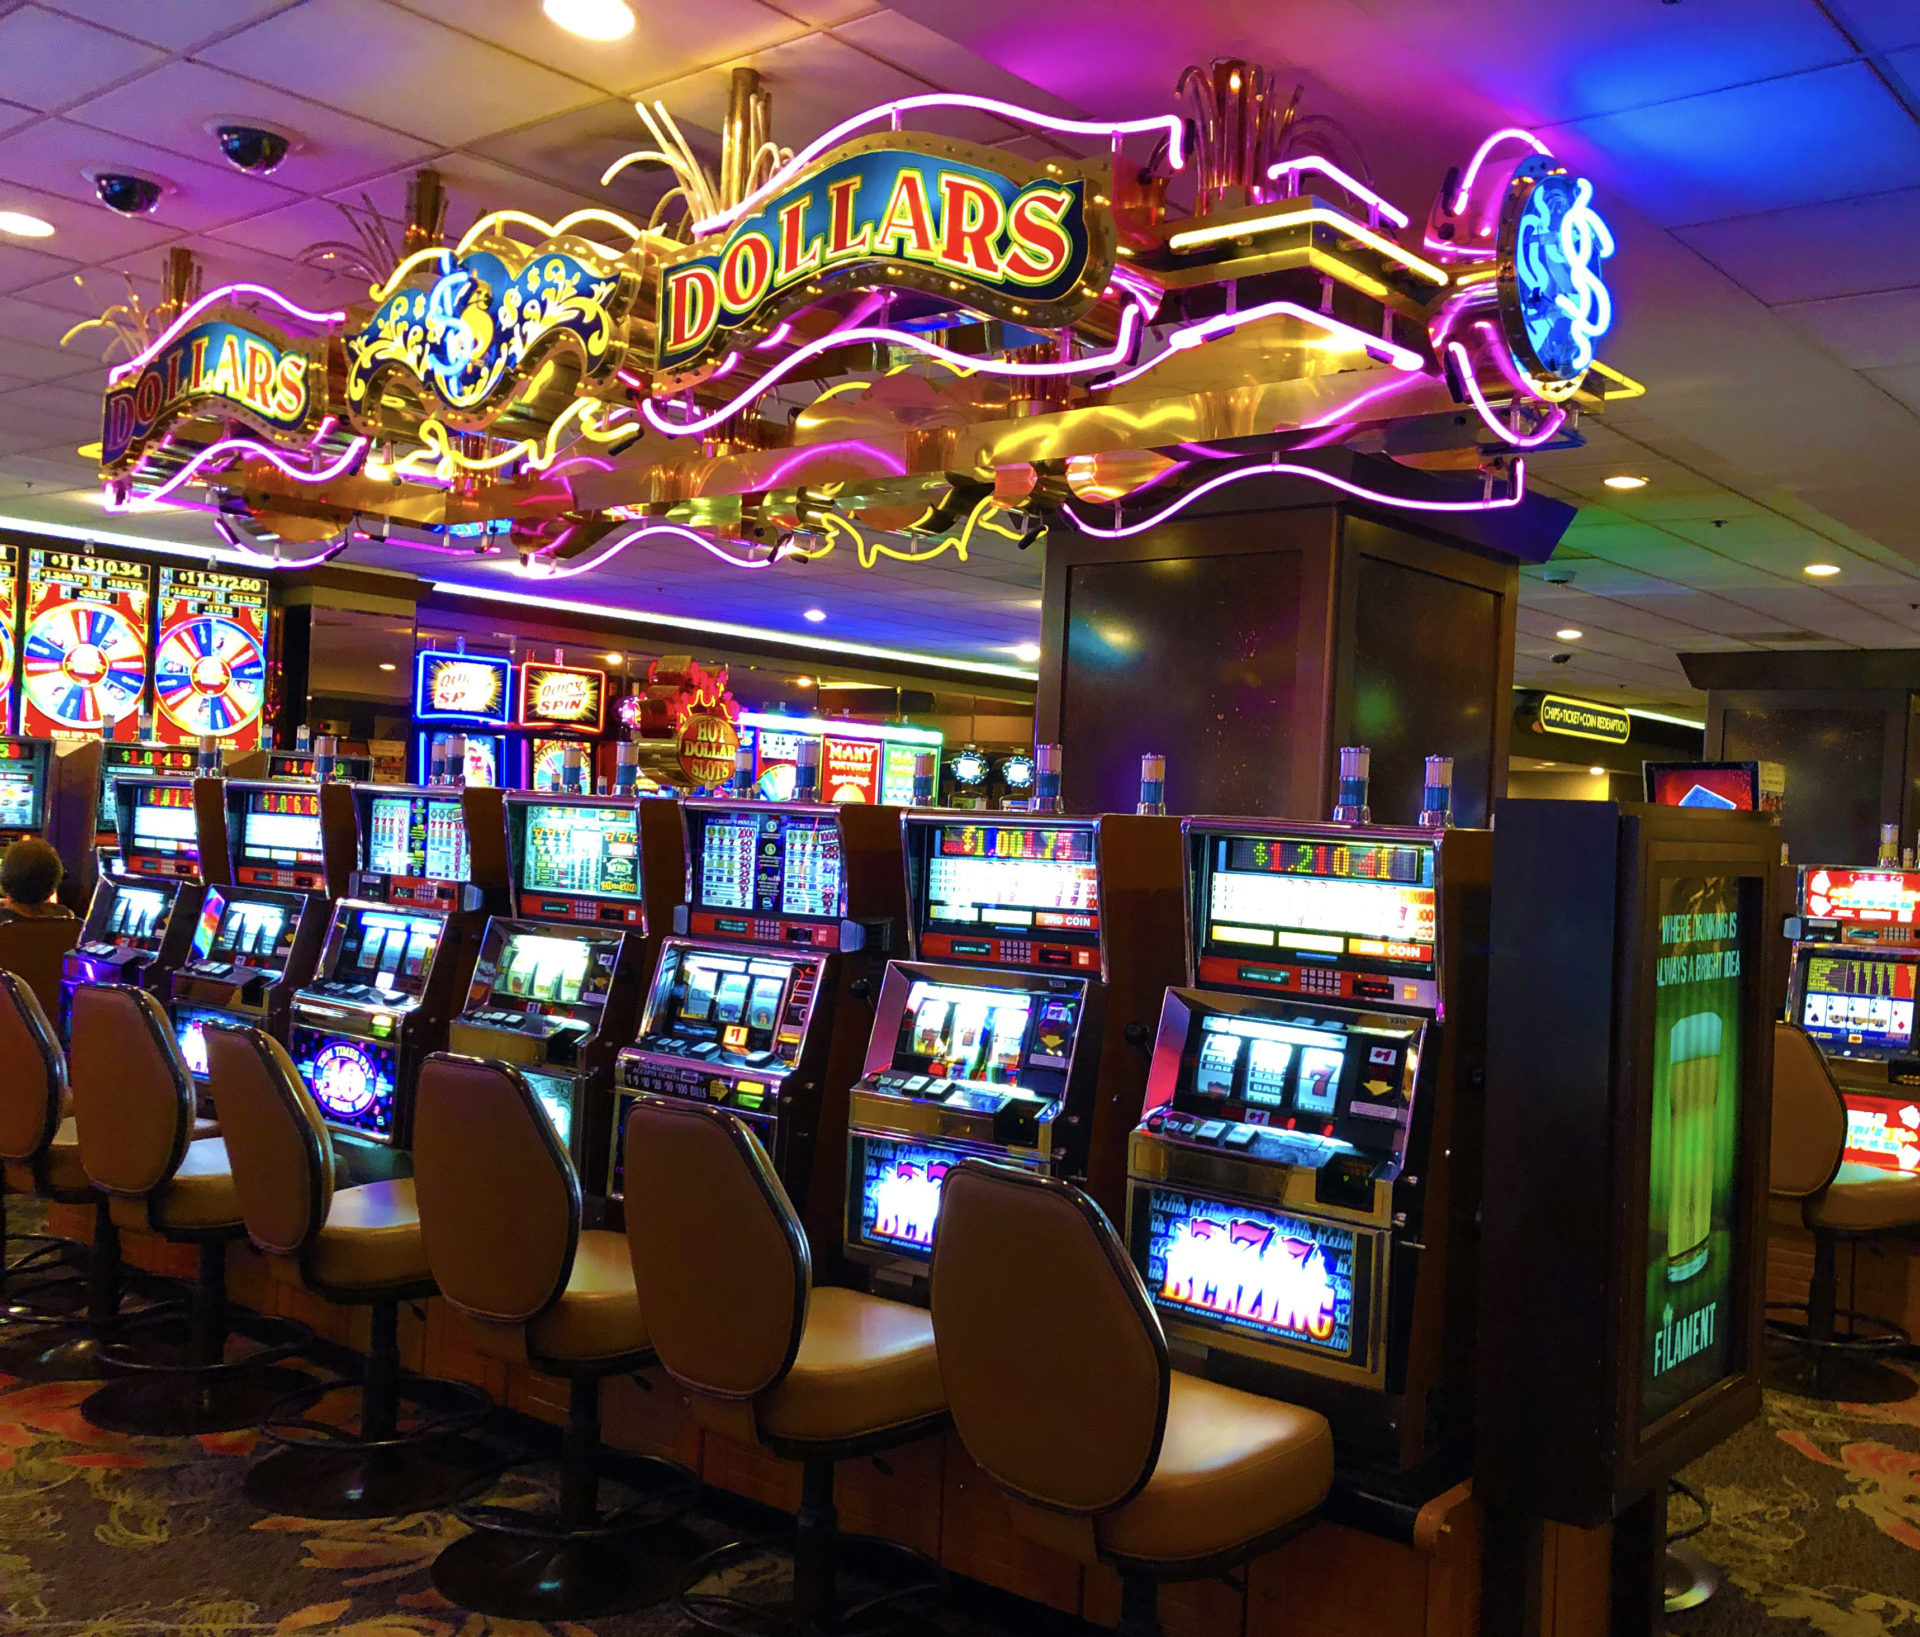 A view of a Las vegas casino where yellow tan seats are lineup to slot machines and a colorful decorative sign hands above saying Dollars Dollars